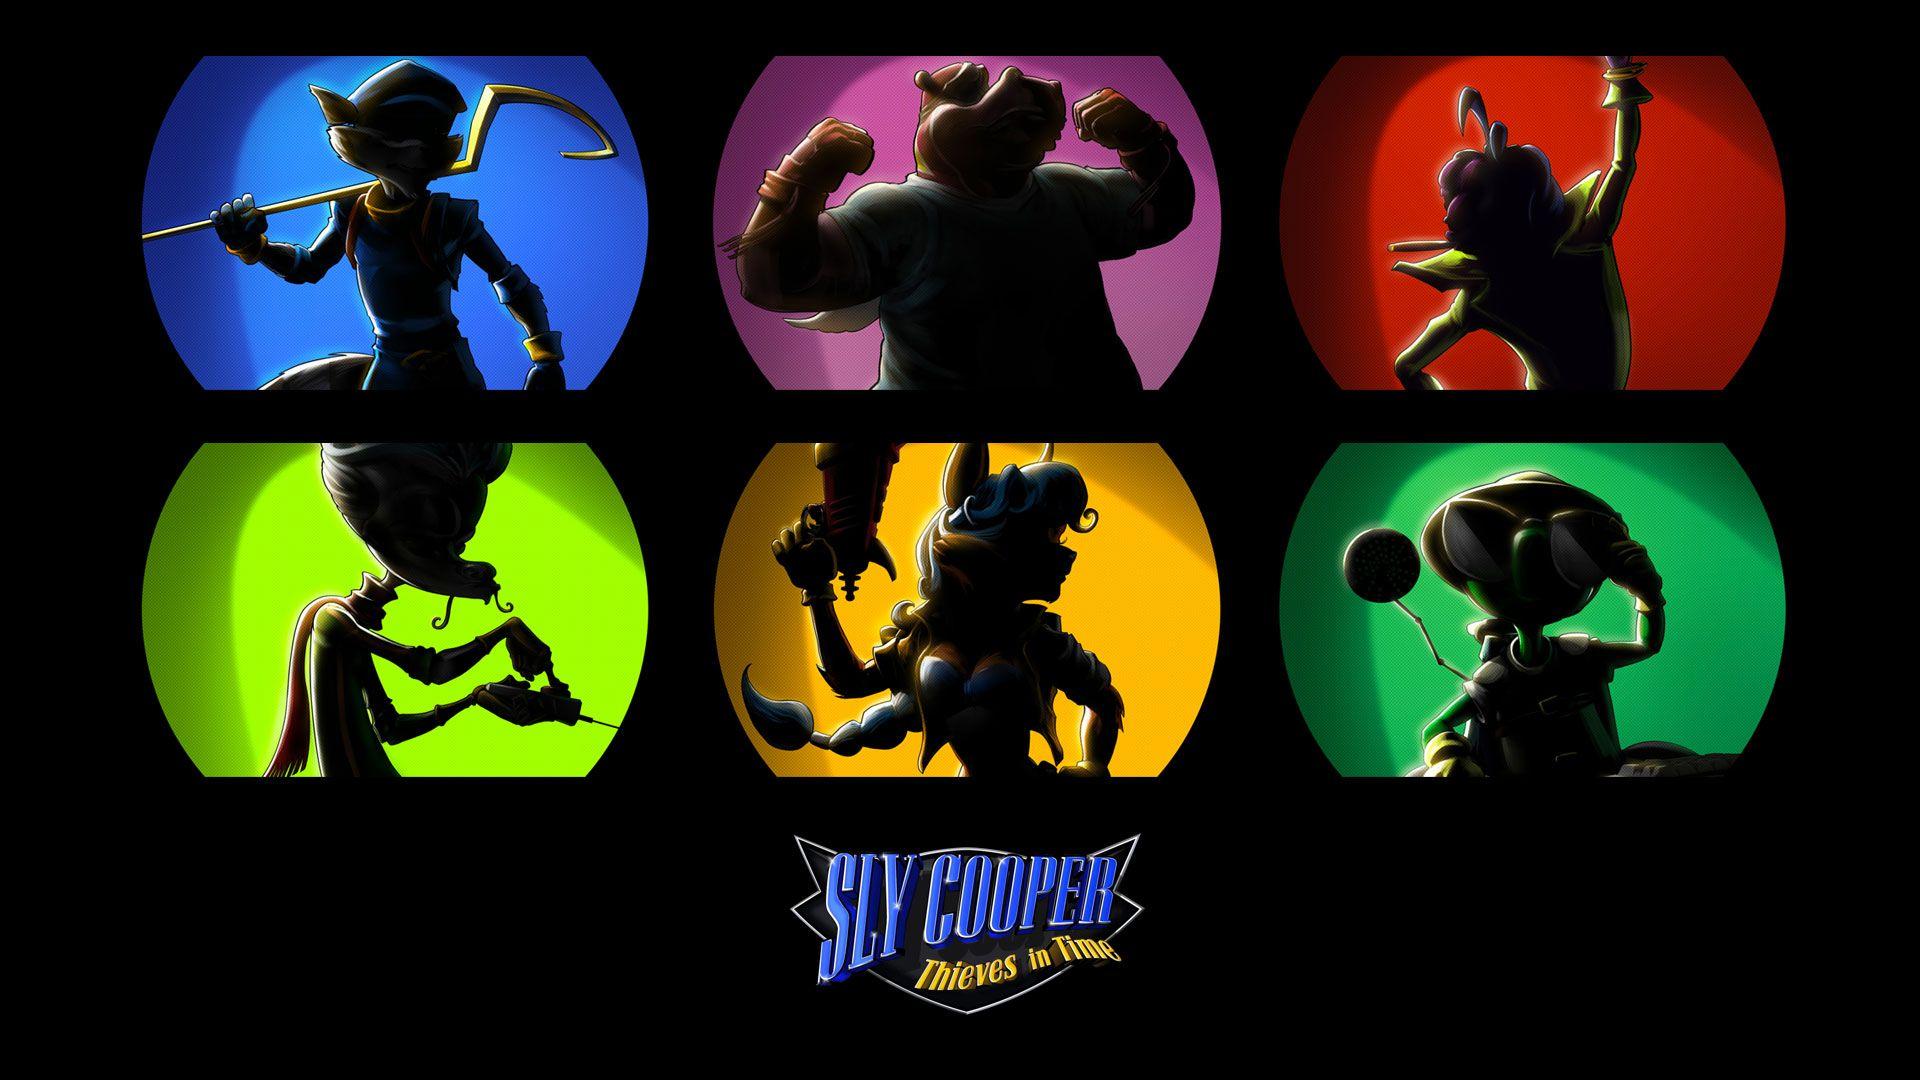 Sly Cooper In Time Full HD Bakgrund and Bakgrund